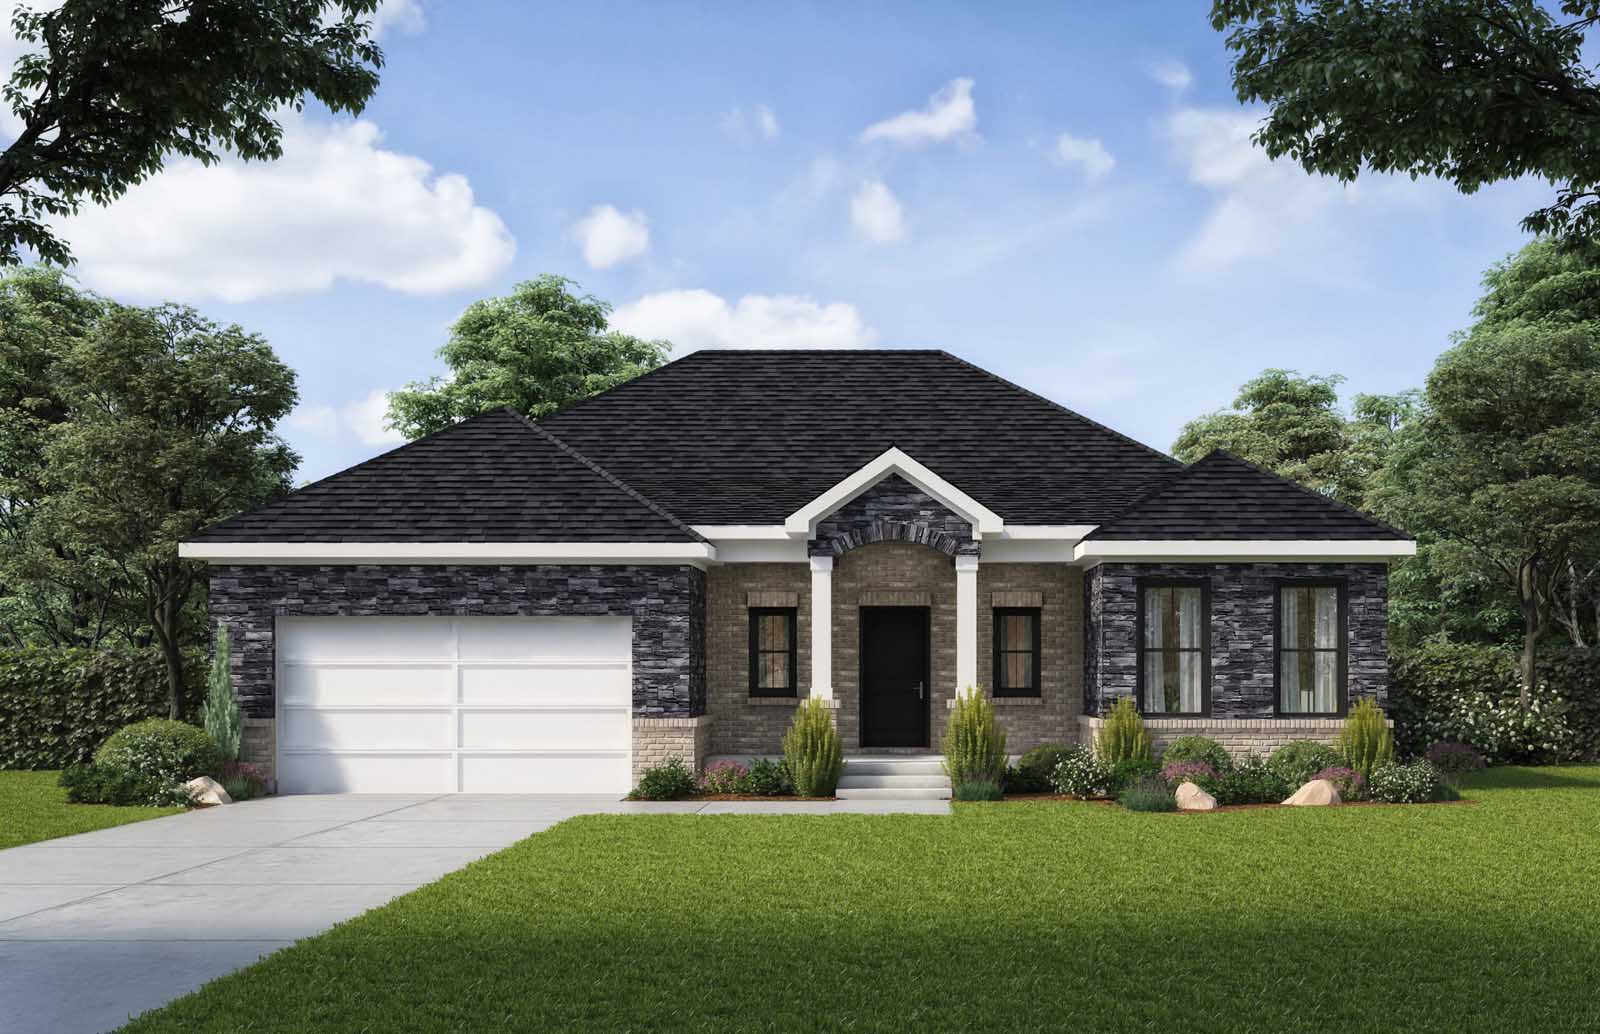 Design Homes The Willow elevation C